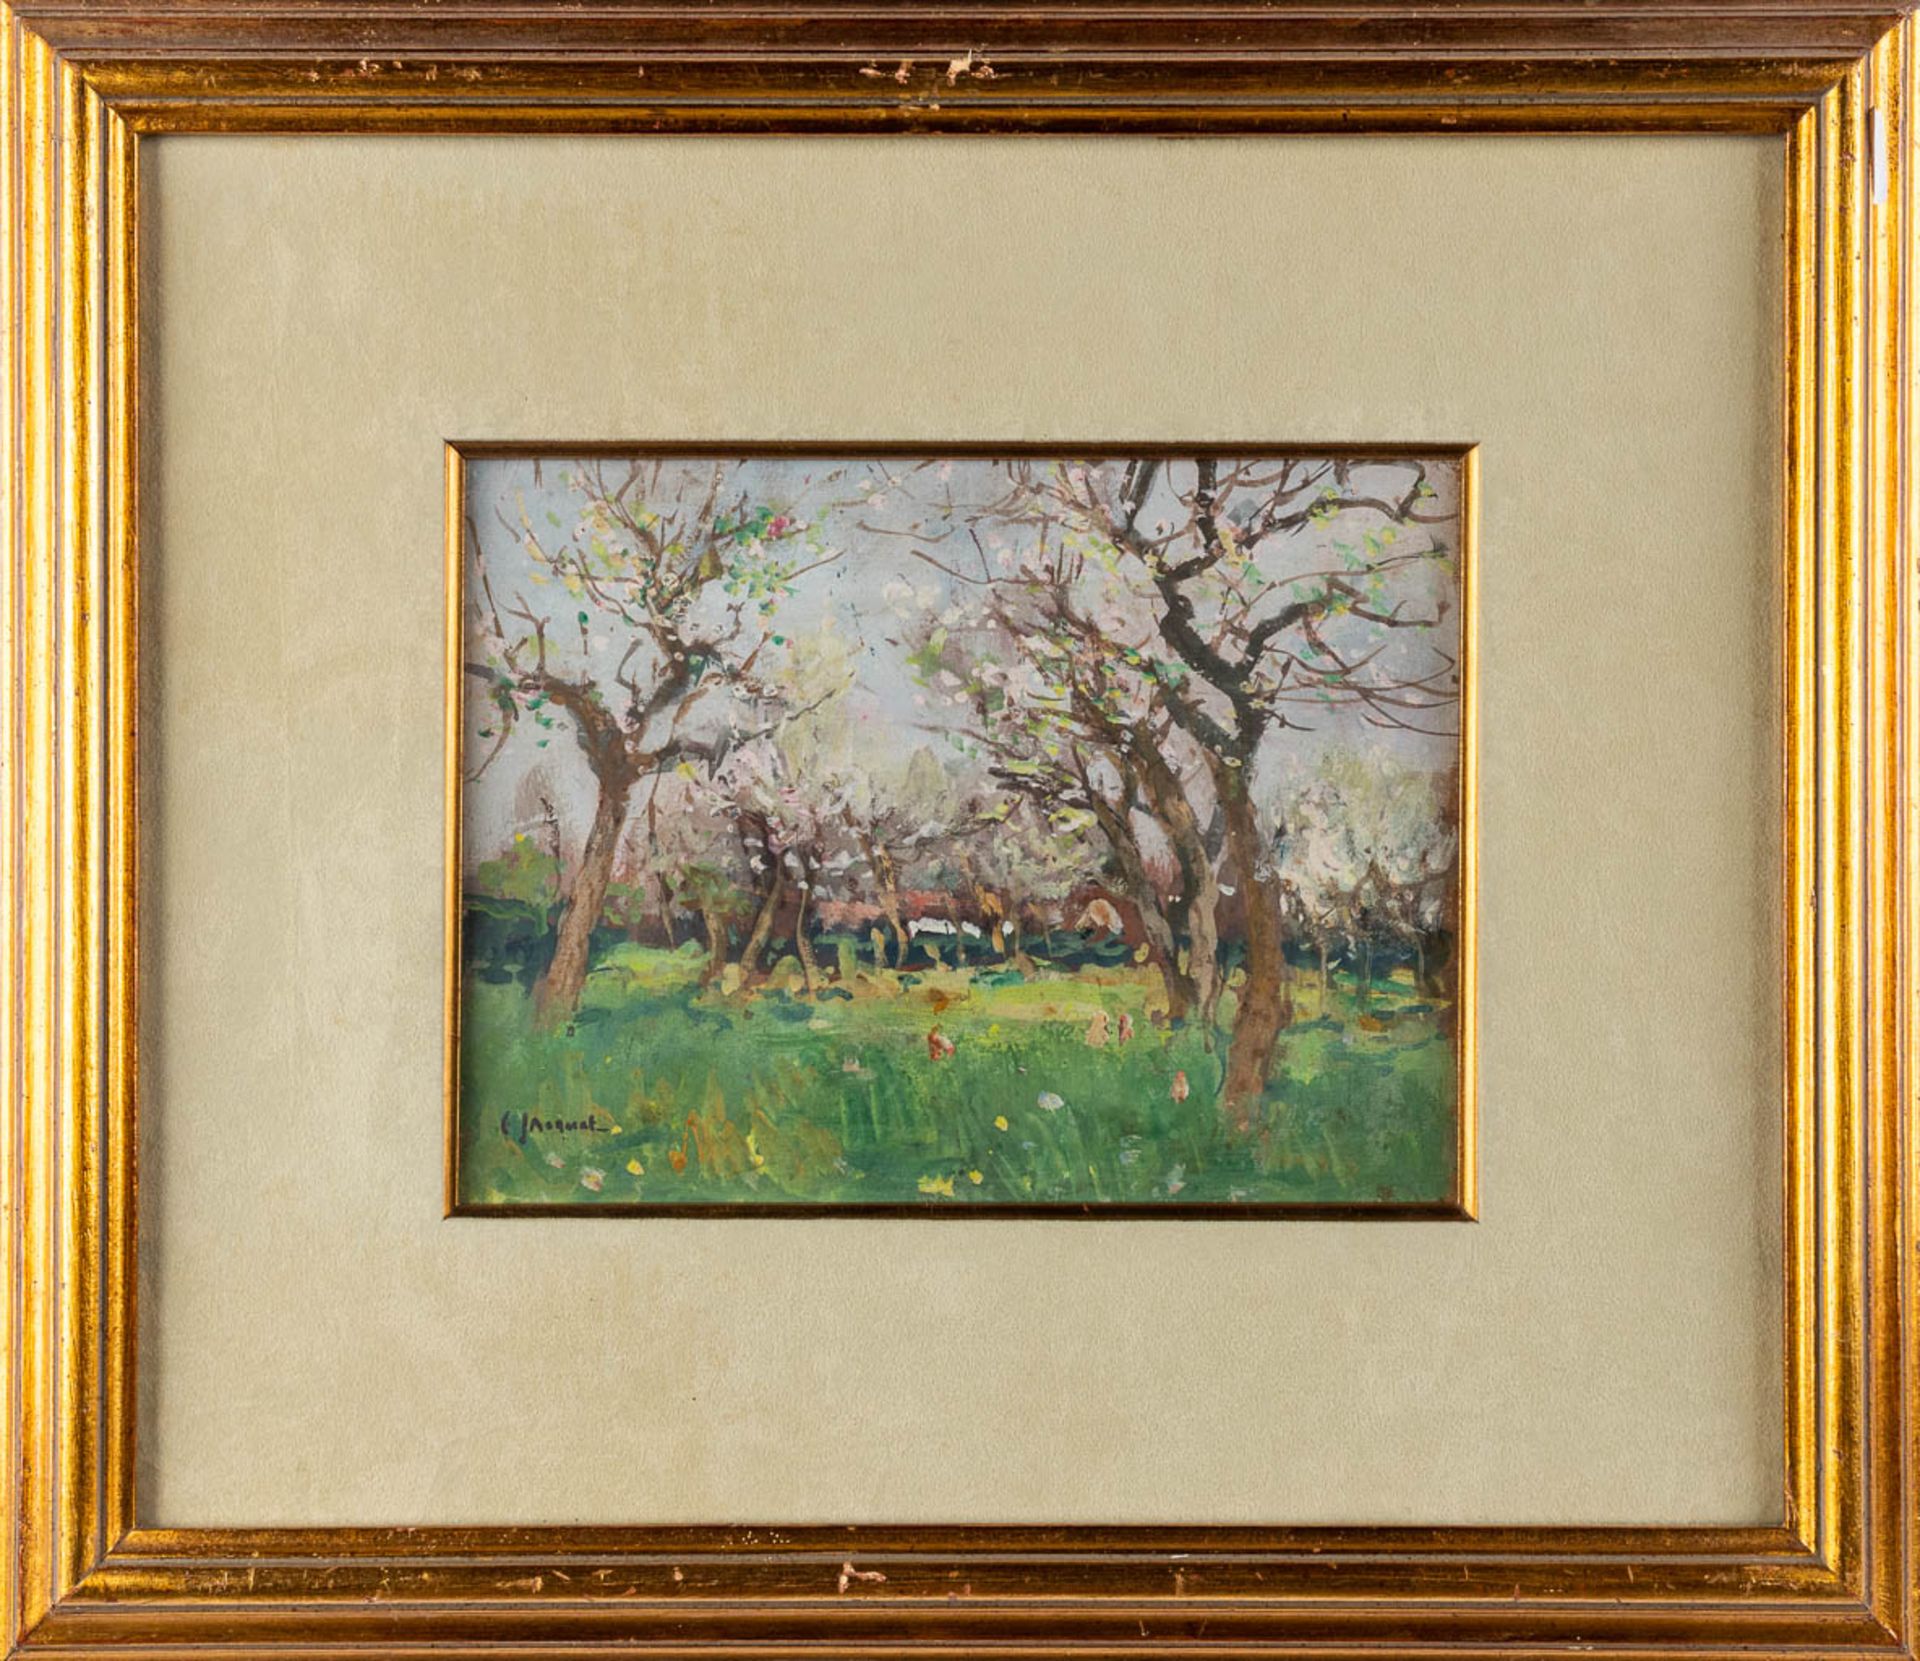 Charles JACQUET (1841-1921) 'The Orchard' oil on paper. (W:27 x H:20 cm) - Image 3 of 5